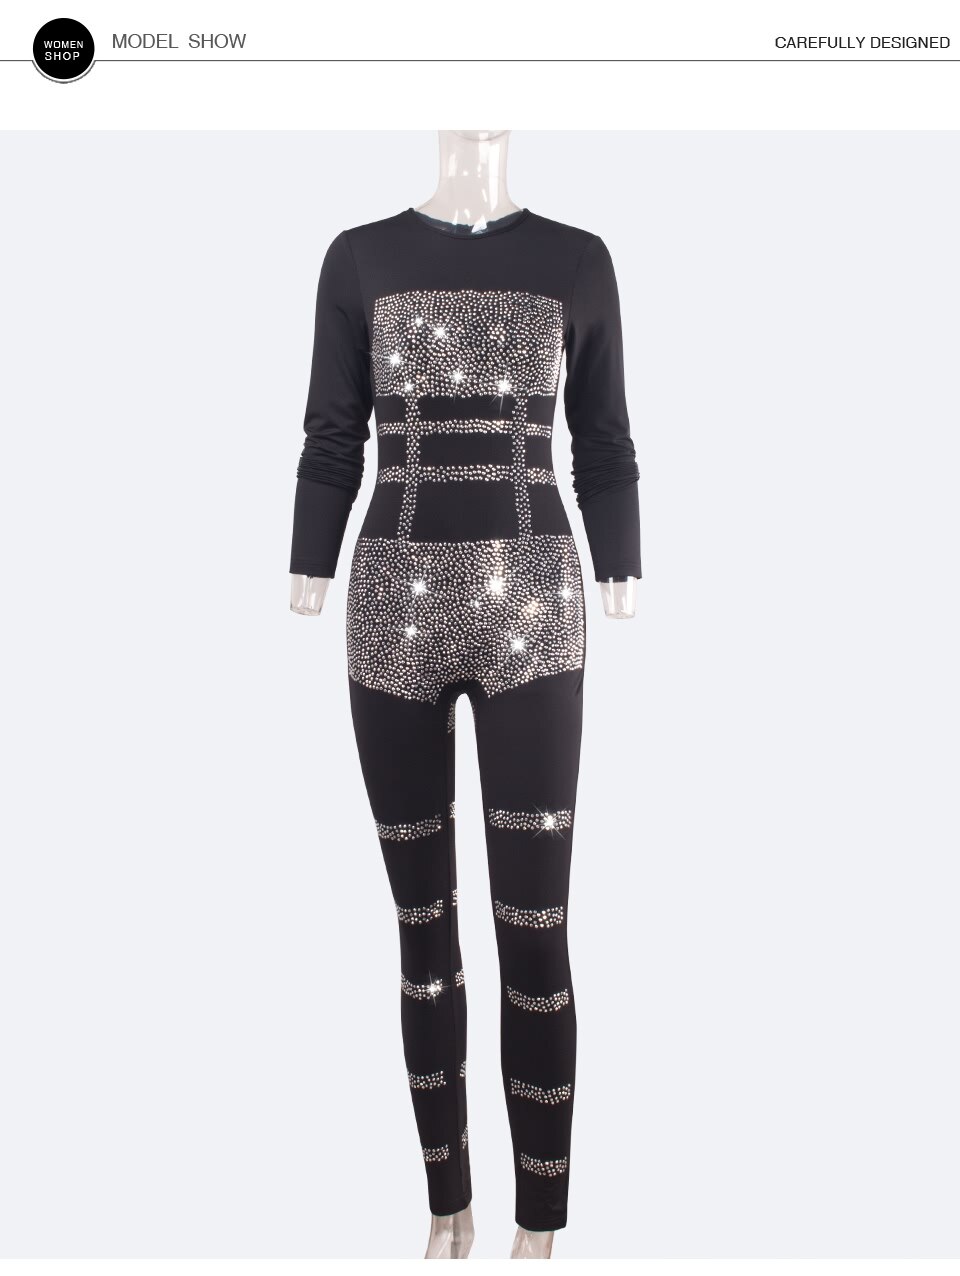 Sedrinuo New Arrival Women One Piece Sequin Long Sleeve O-Ncek Jumpsuits Bodycon Rhinestone Jumpsuit Sexy Club Party Bodysuits